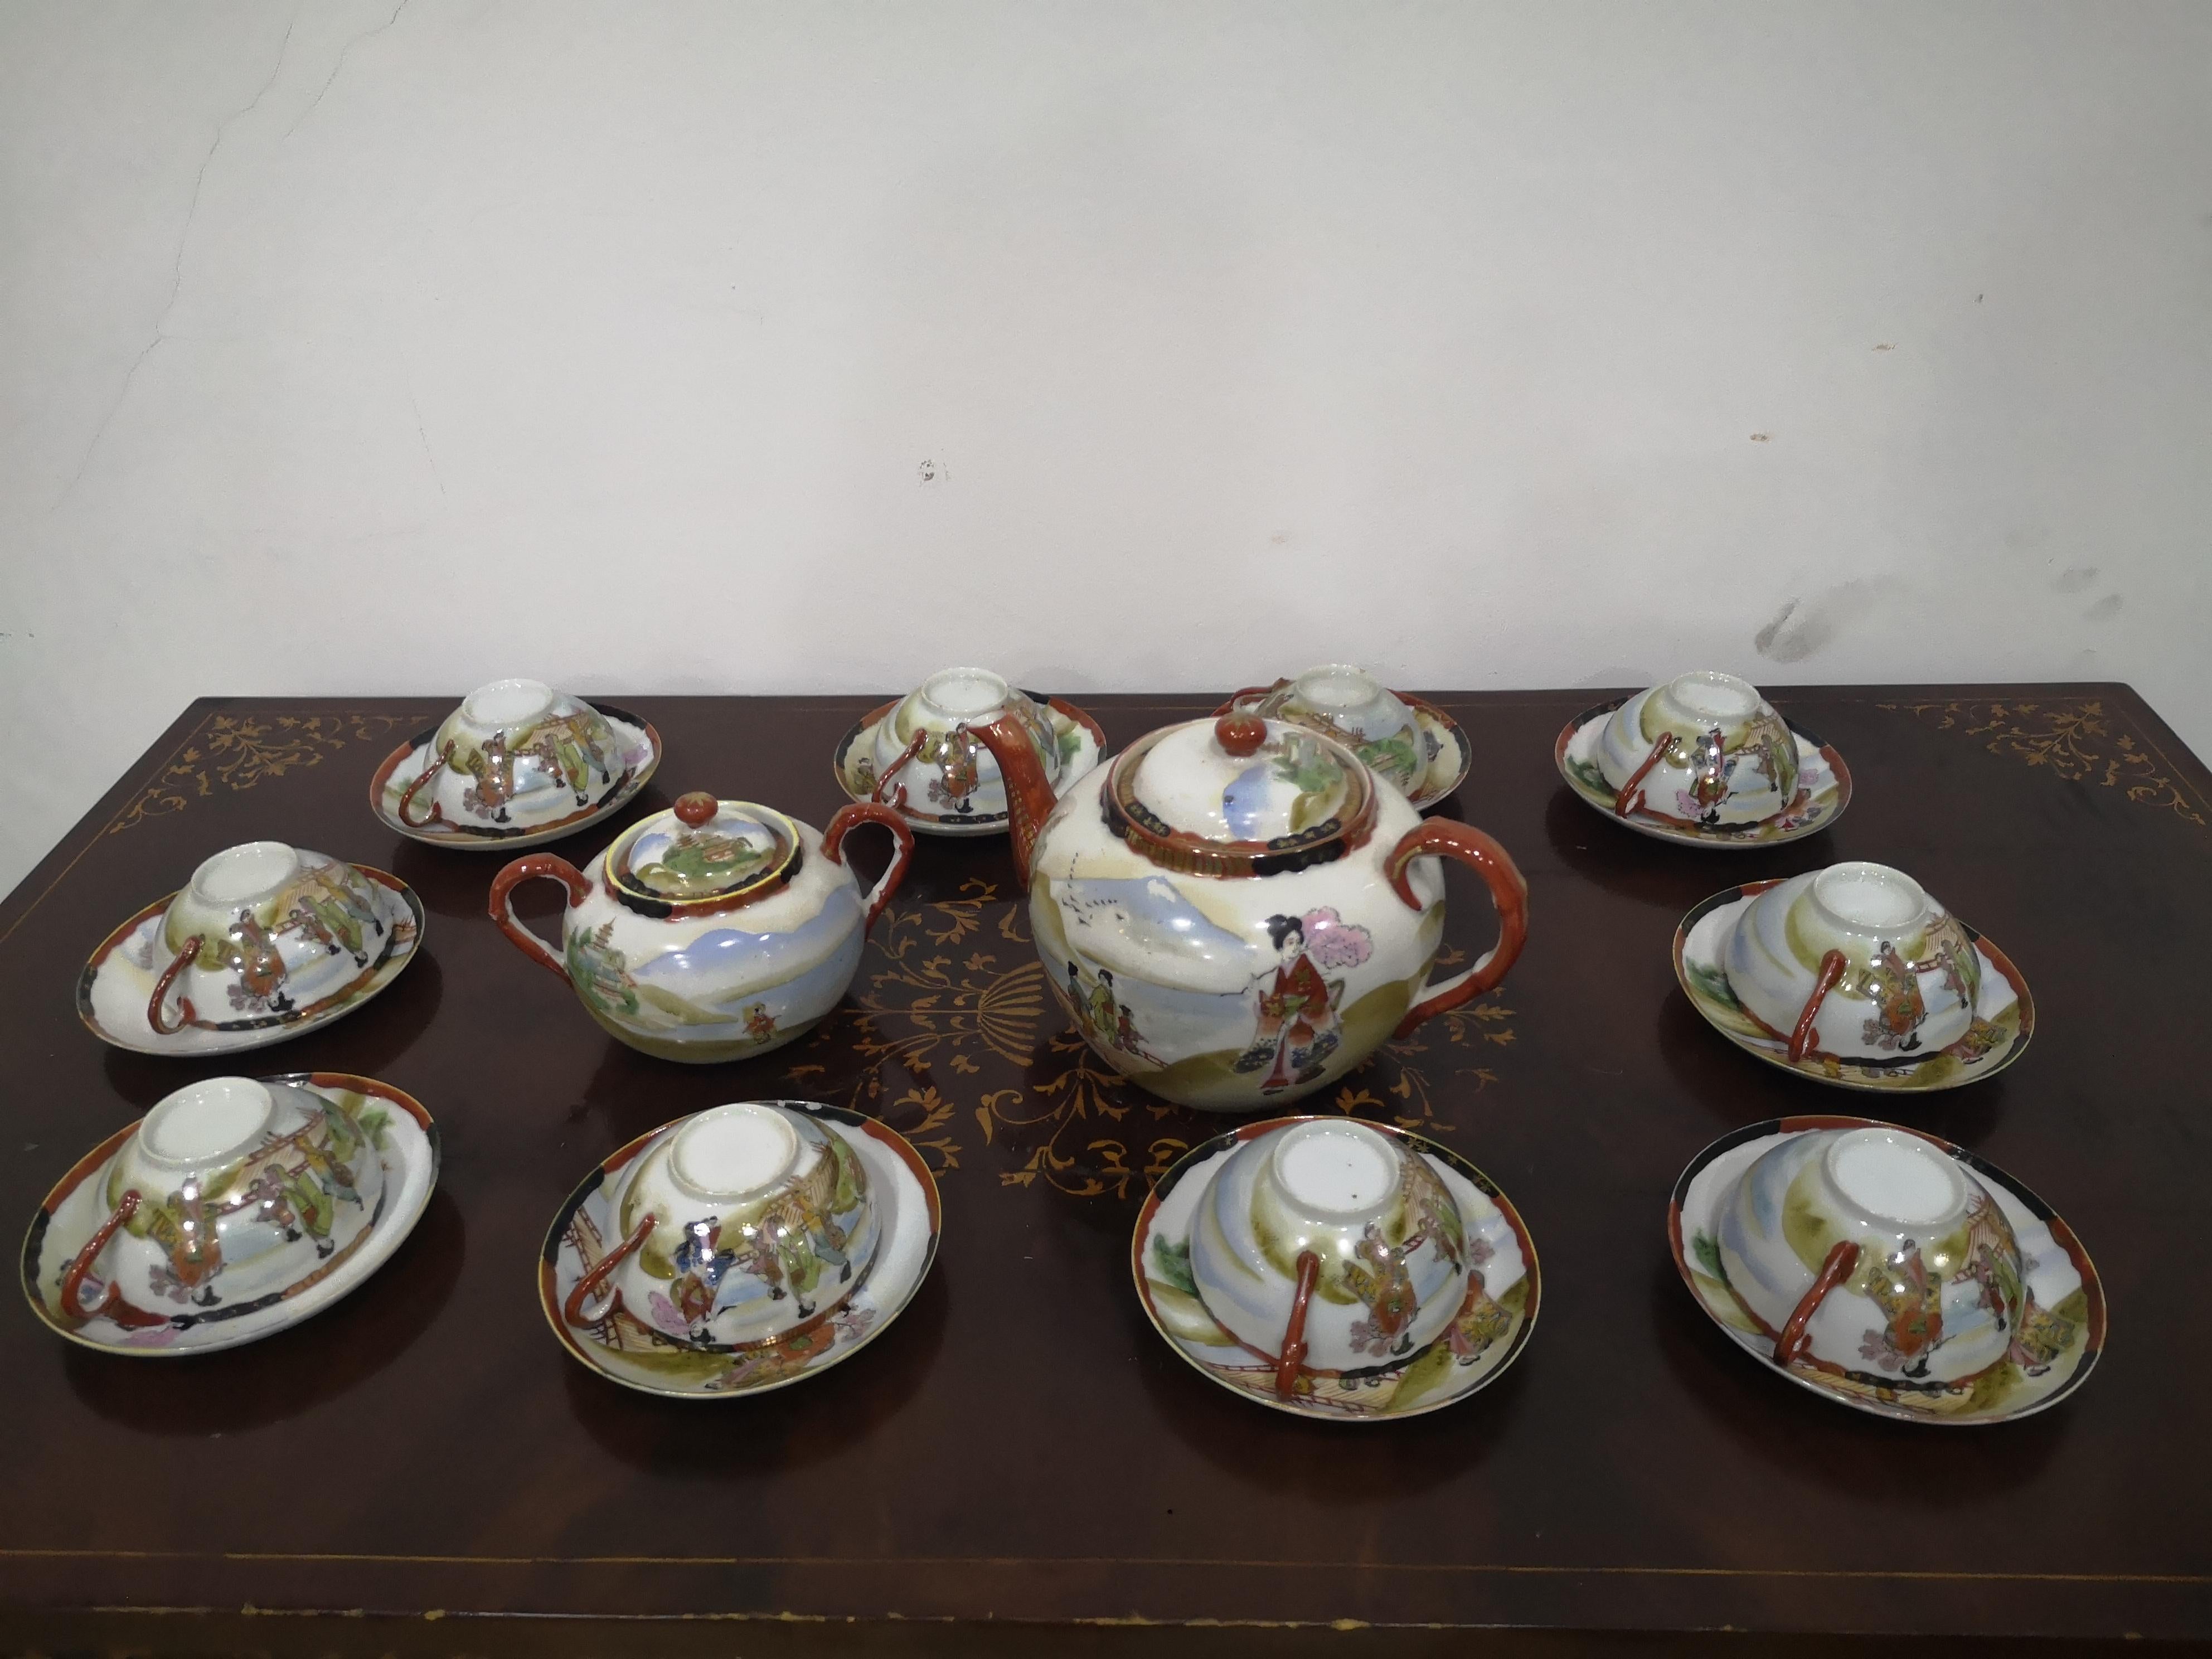 Japanese tea service for 10 in fine porcelain from the mid-19th century
Hand painted of excellent workmanship as visible in the photo
in good condition.
The service consists of:
10 cups with saucers
1 teapot
1 sugar bowl

Measures:
saucer 14 cm
cup